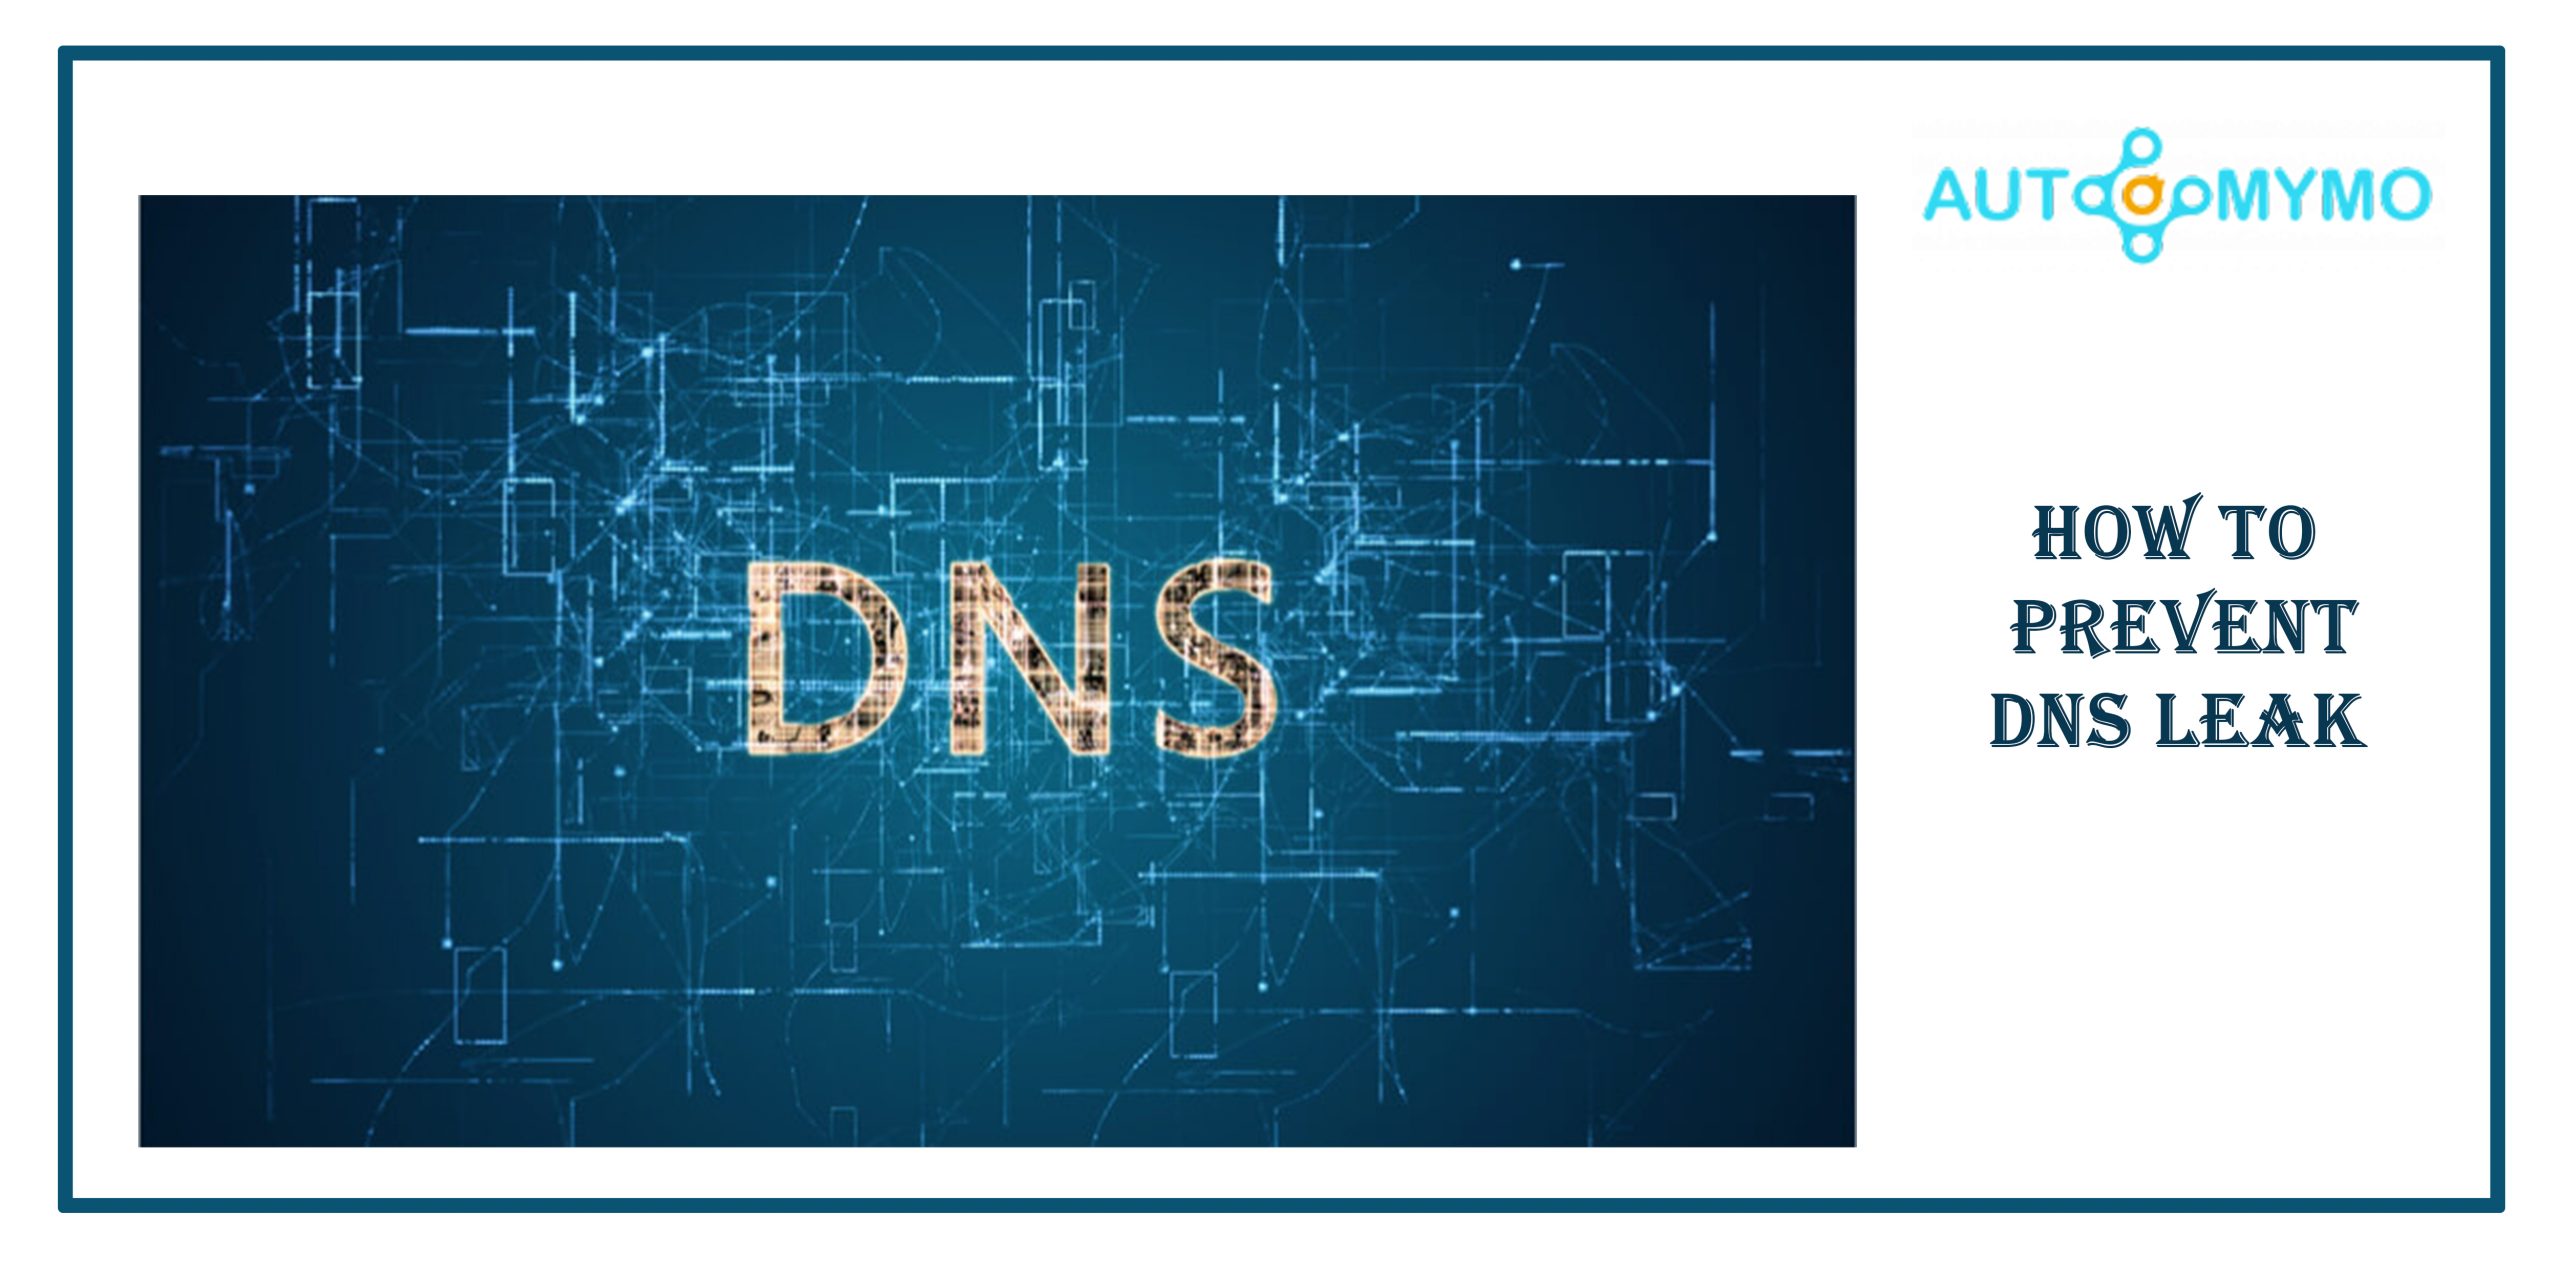 How to Prevent DNS Leak